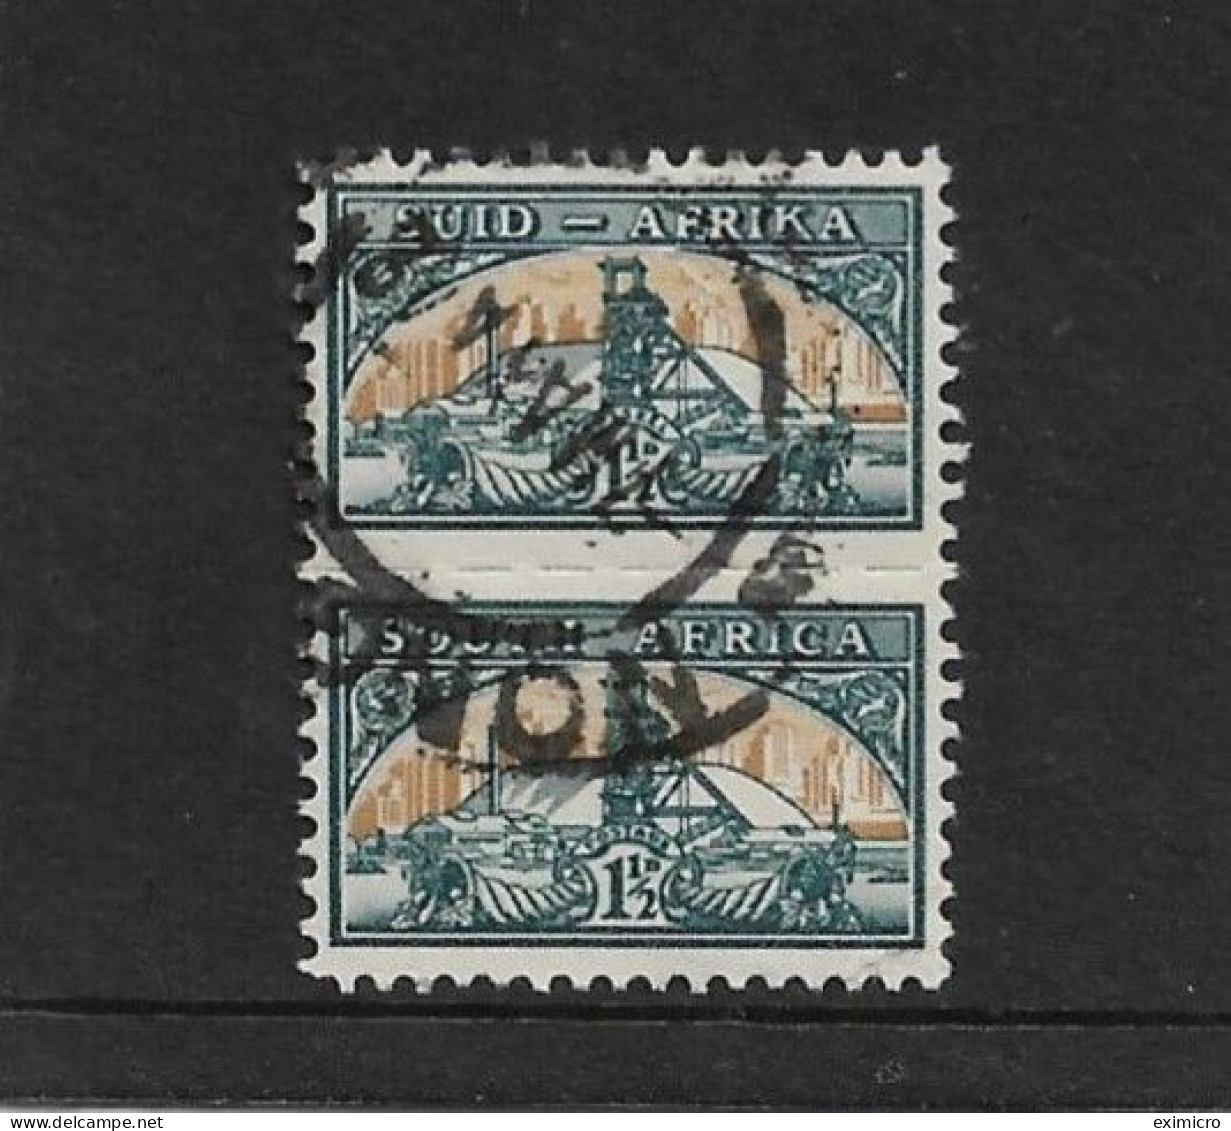 SOUTH AFRICA 1948 1½d IN PAIR SG 124 FINE USED - Used Stamps